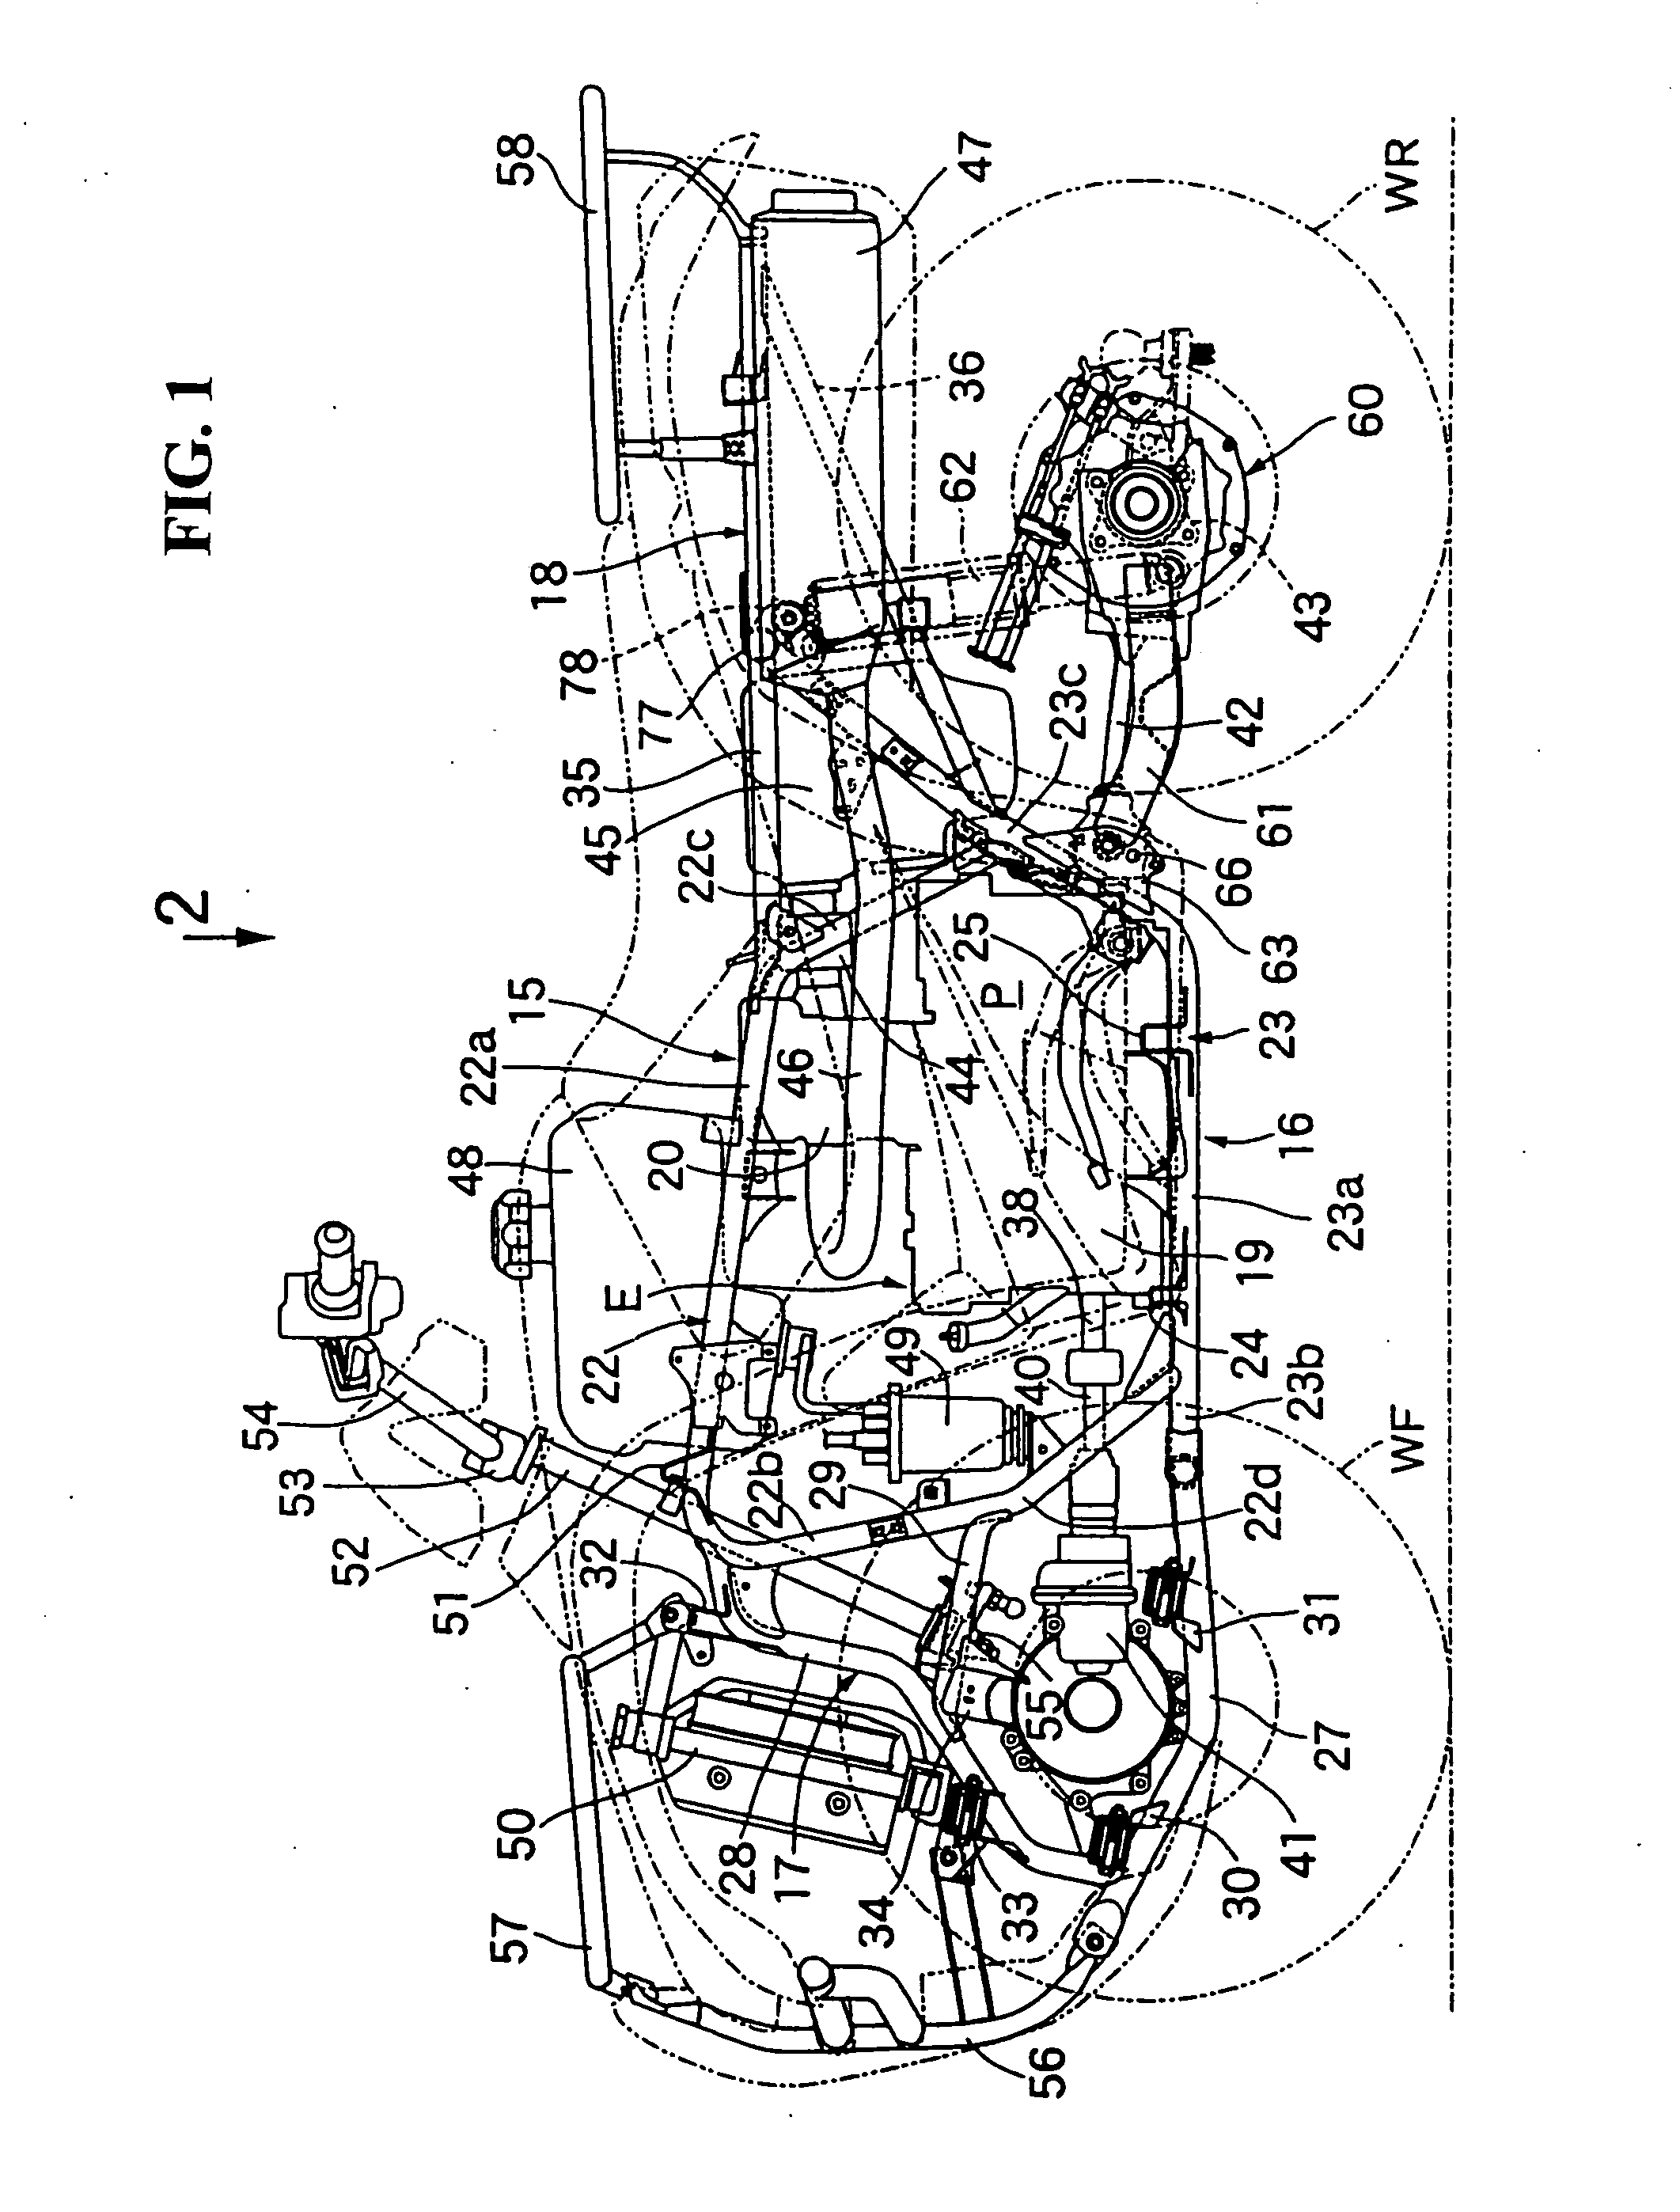 Cover structure for buggy vehicle